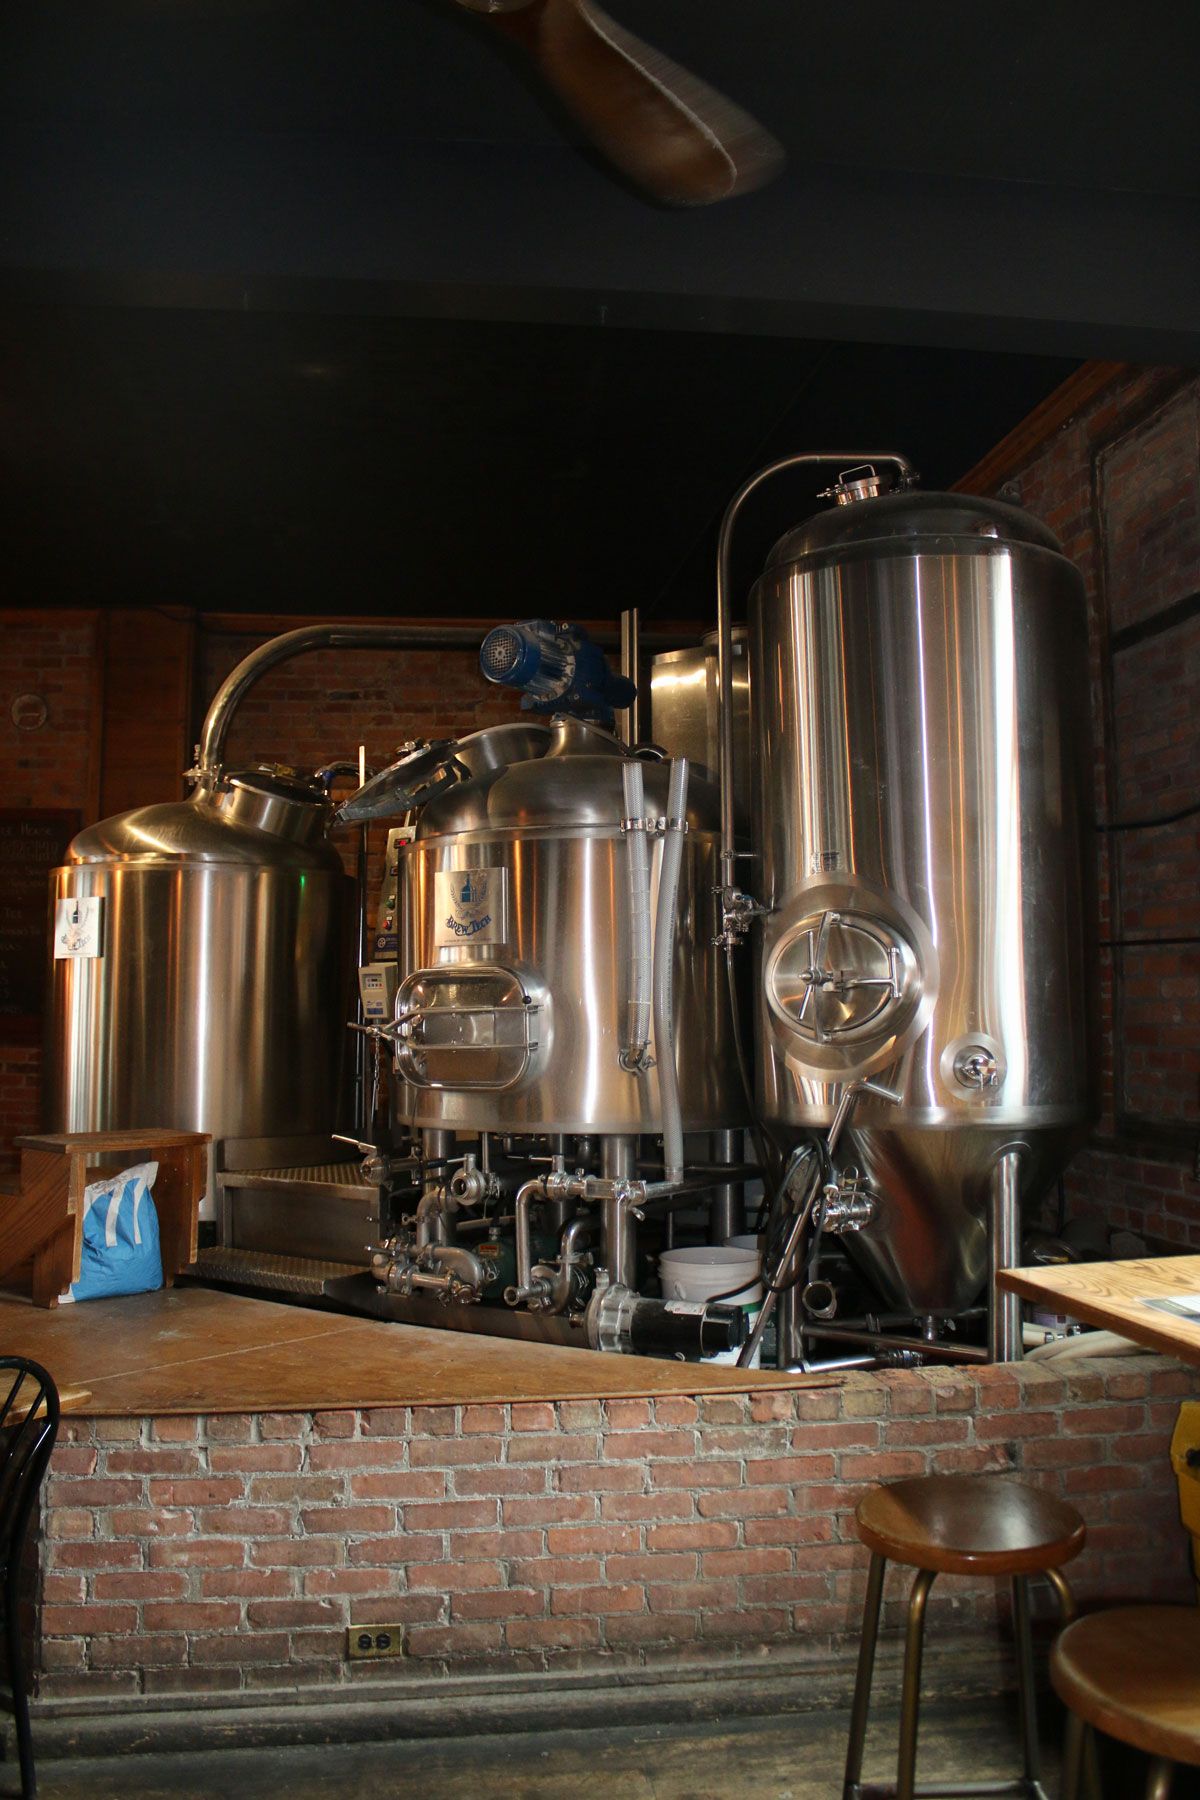 The active brewery operation makes a unique background.